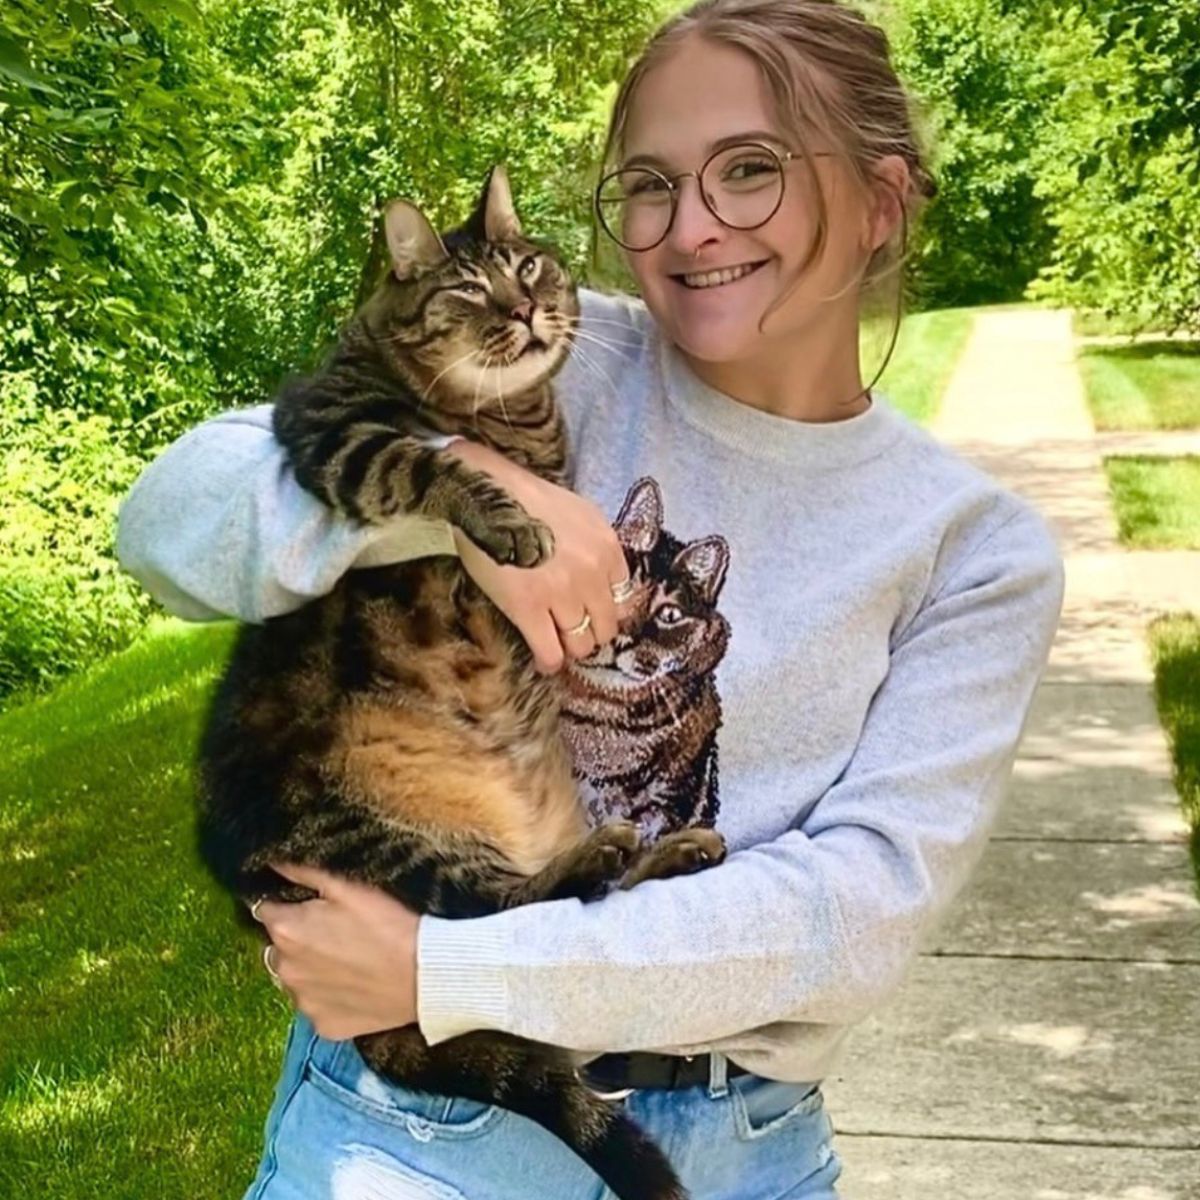 smiling woman with glasses holds a cat